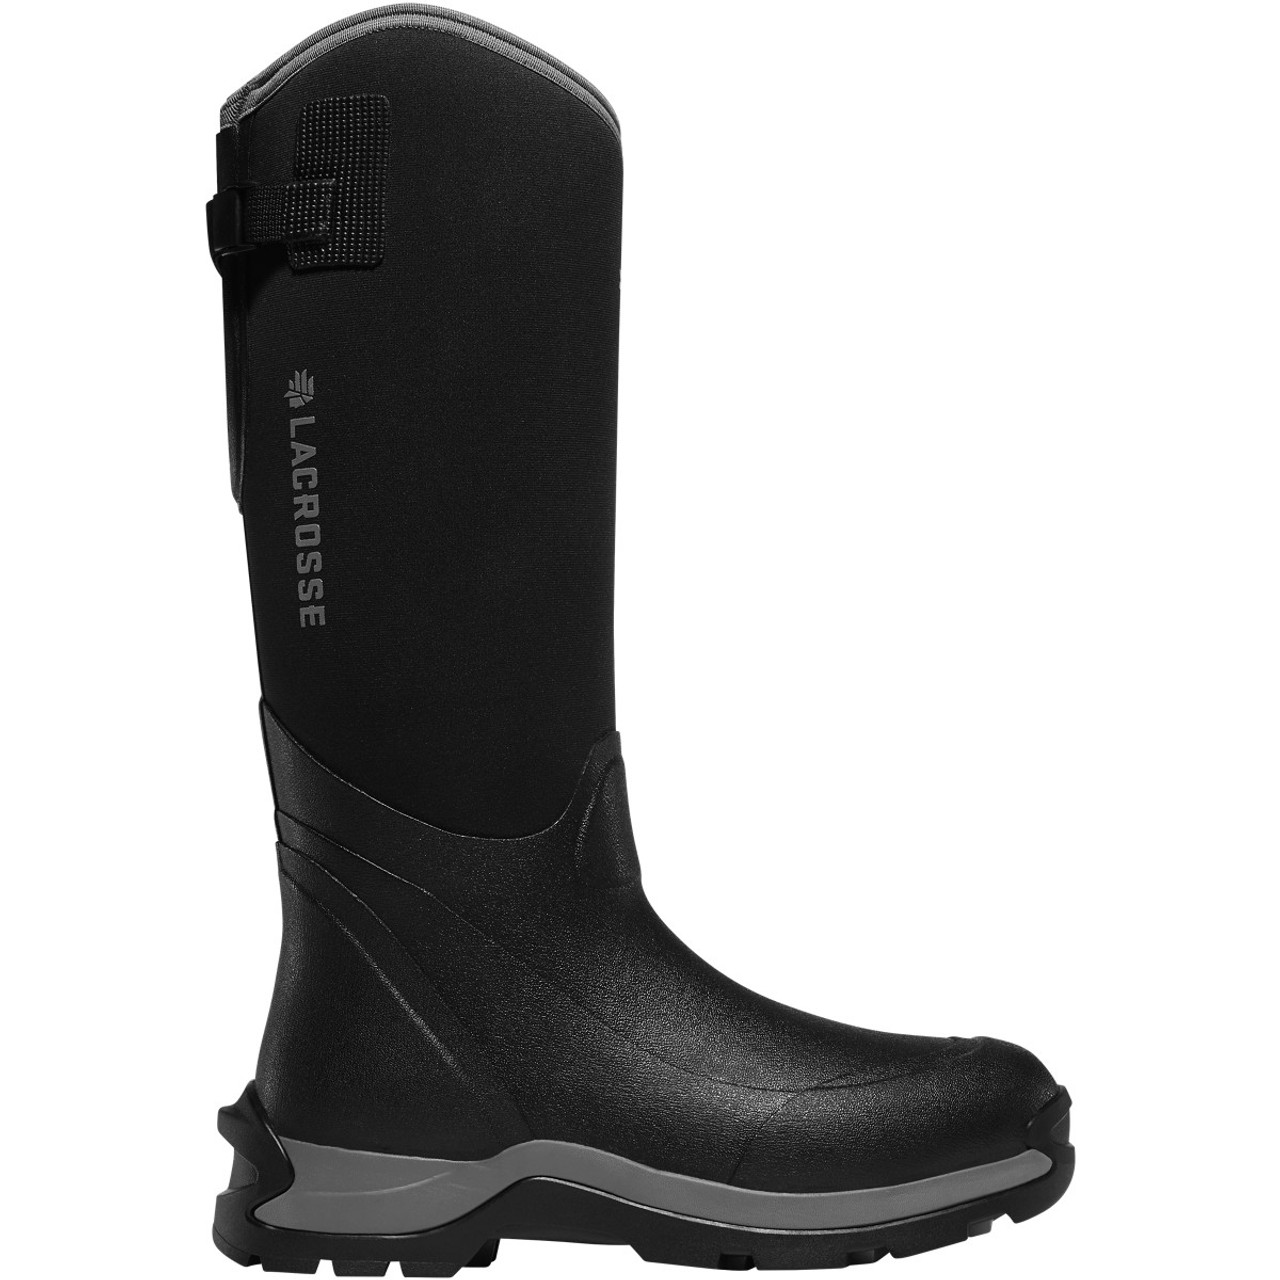 LACROSSE ALPHA THERMAL BLACK 7.0MM UTILITY BOOTS 644101